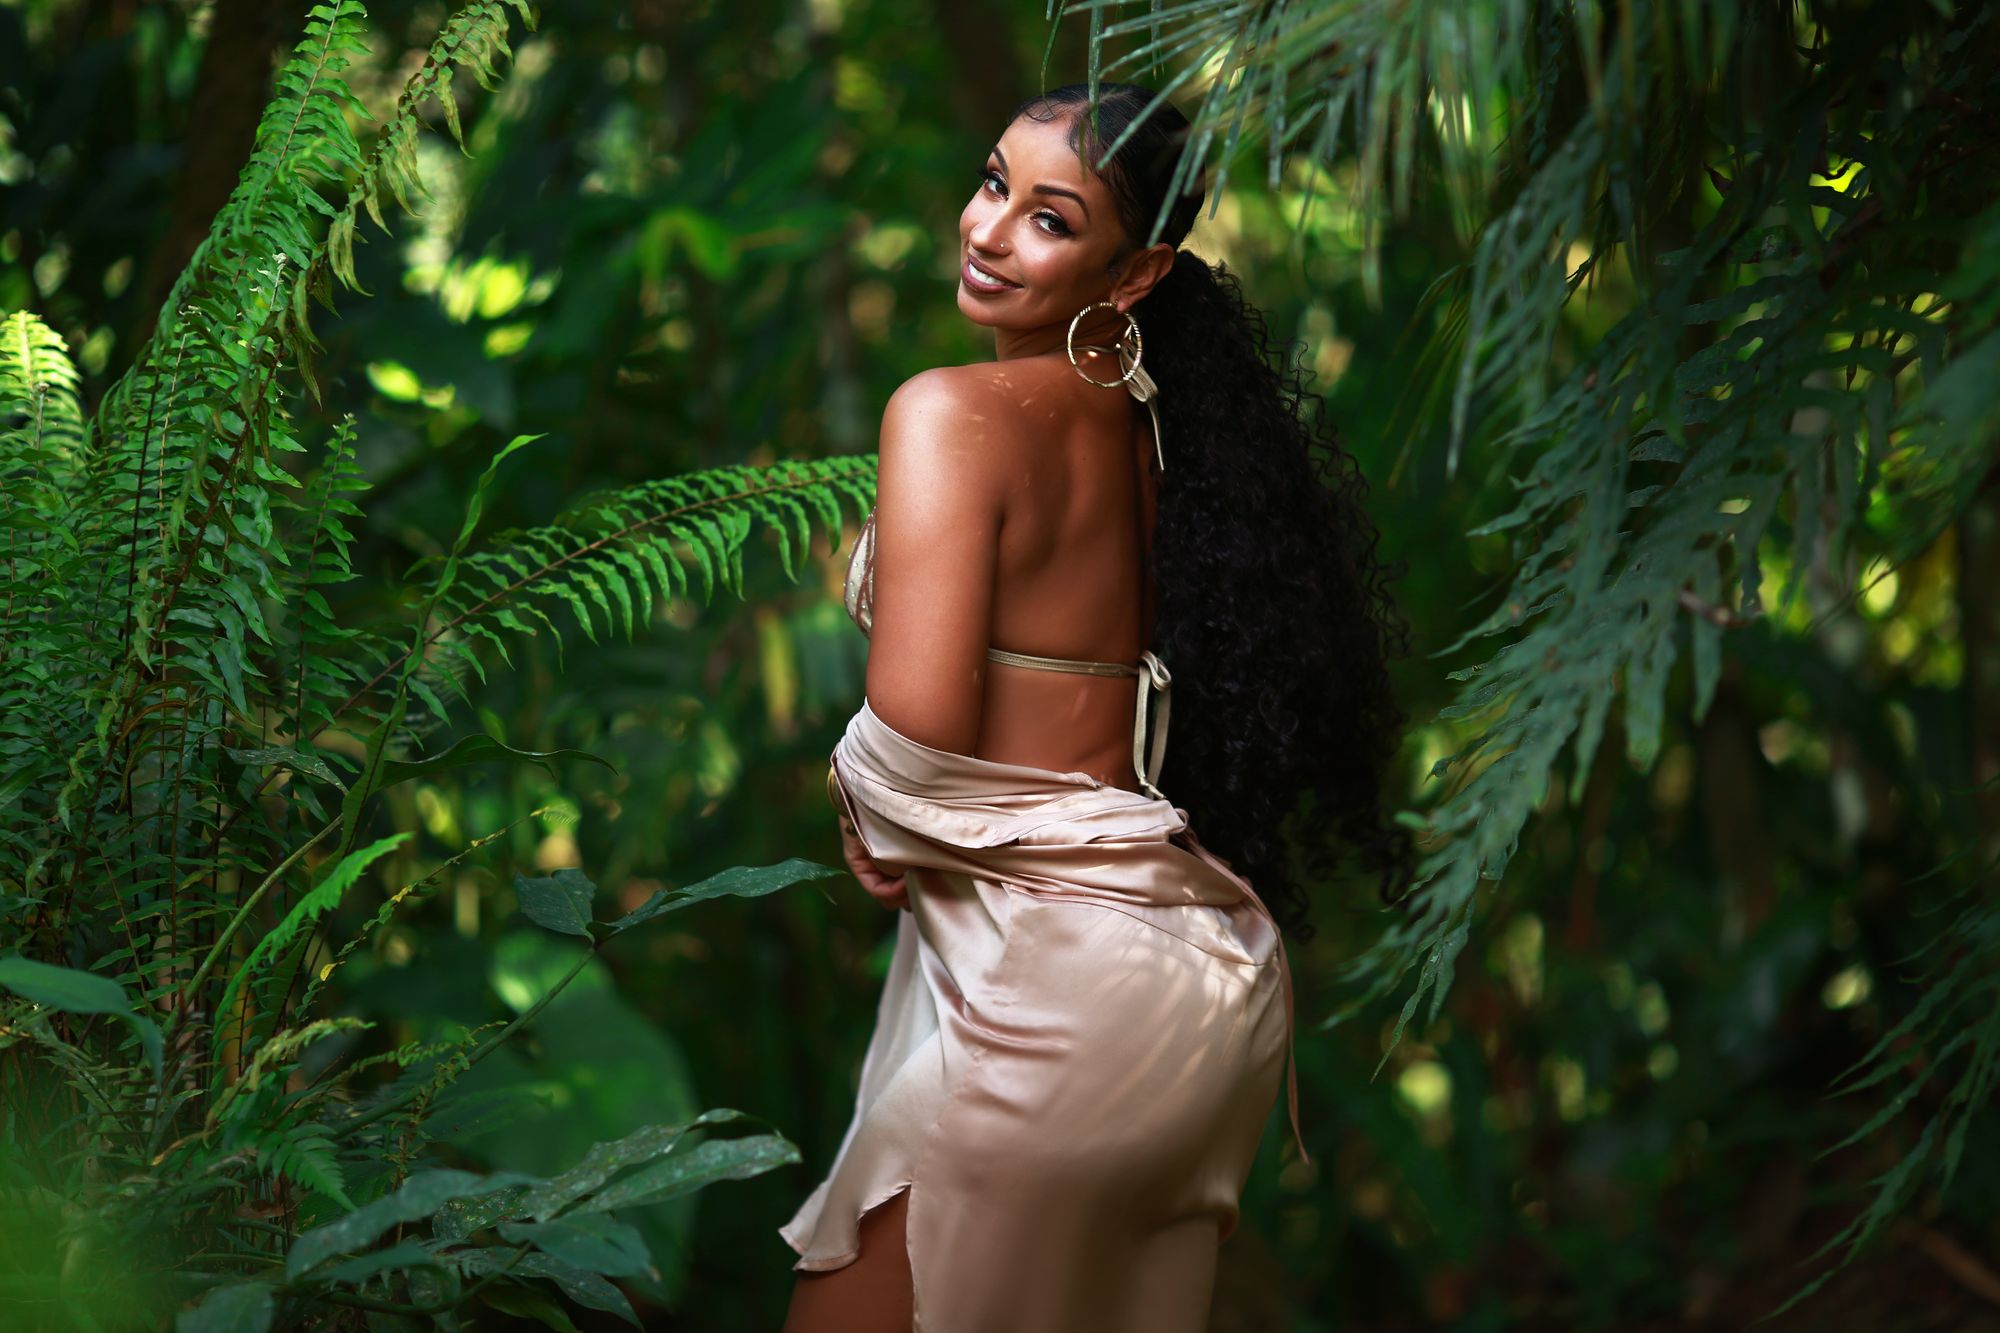 R&B singer Mya releases deluxe version of her self-titled album after 25 years